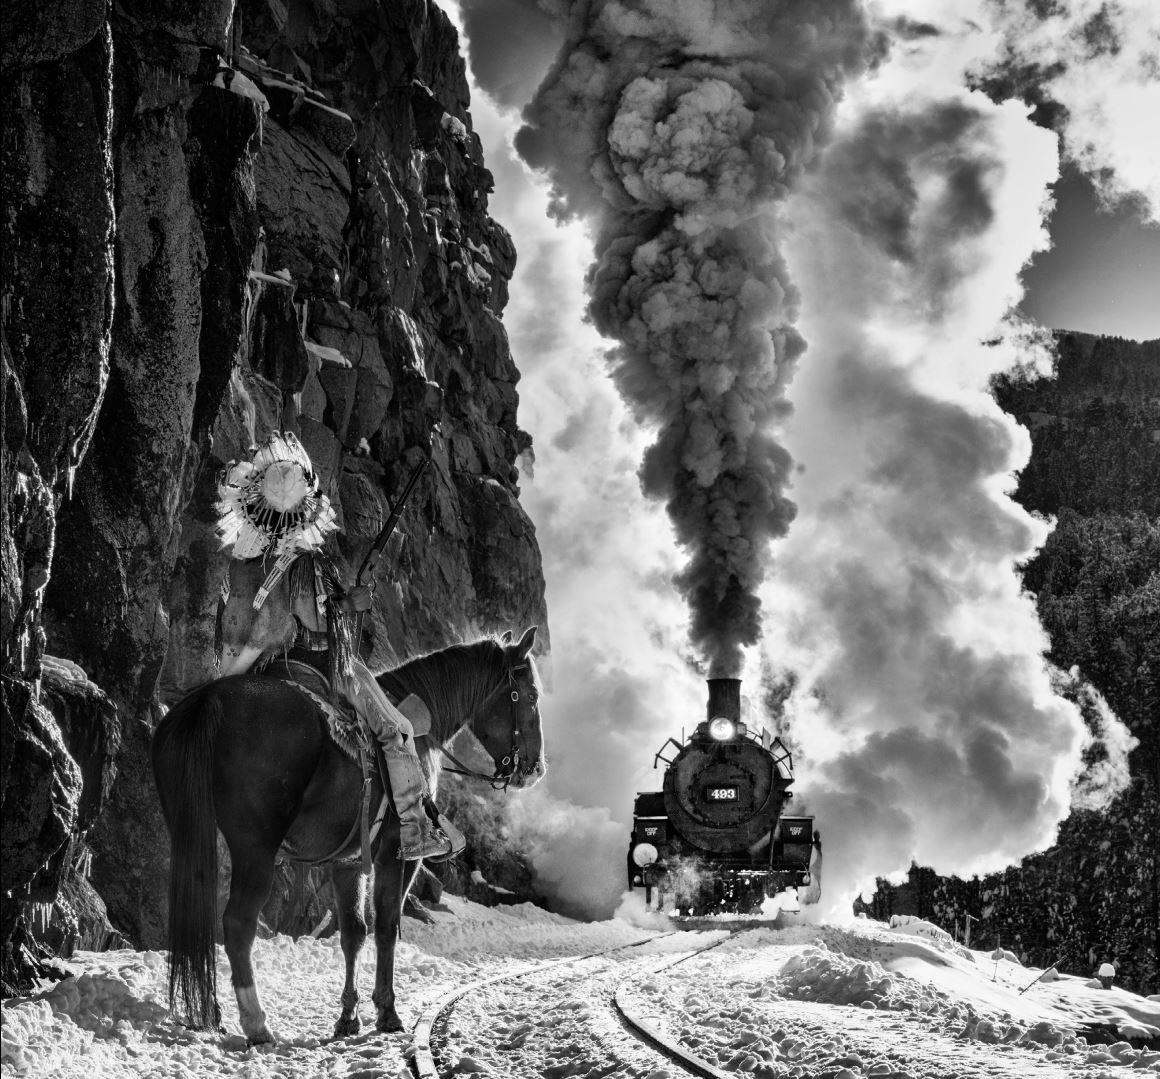 The Manifest Destiny - b&w photograph showing a train and a native american 